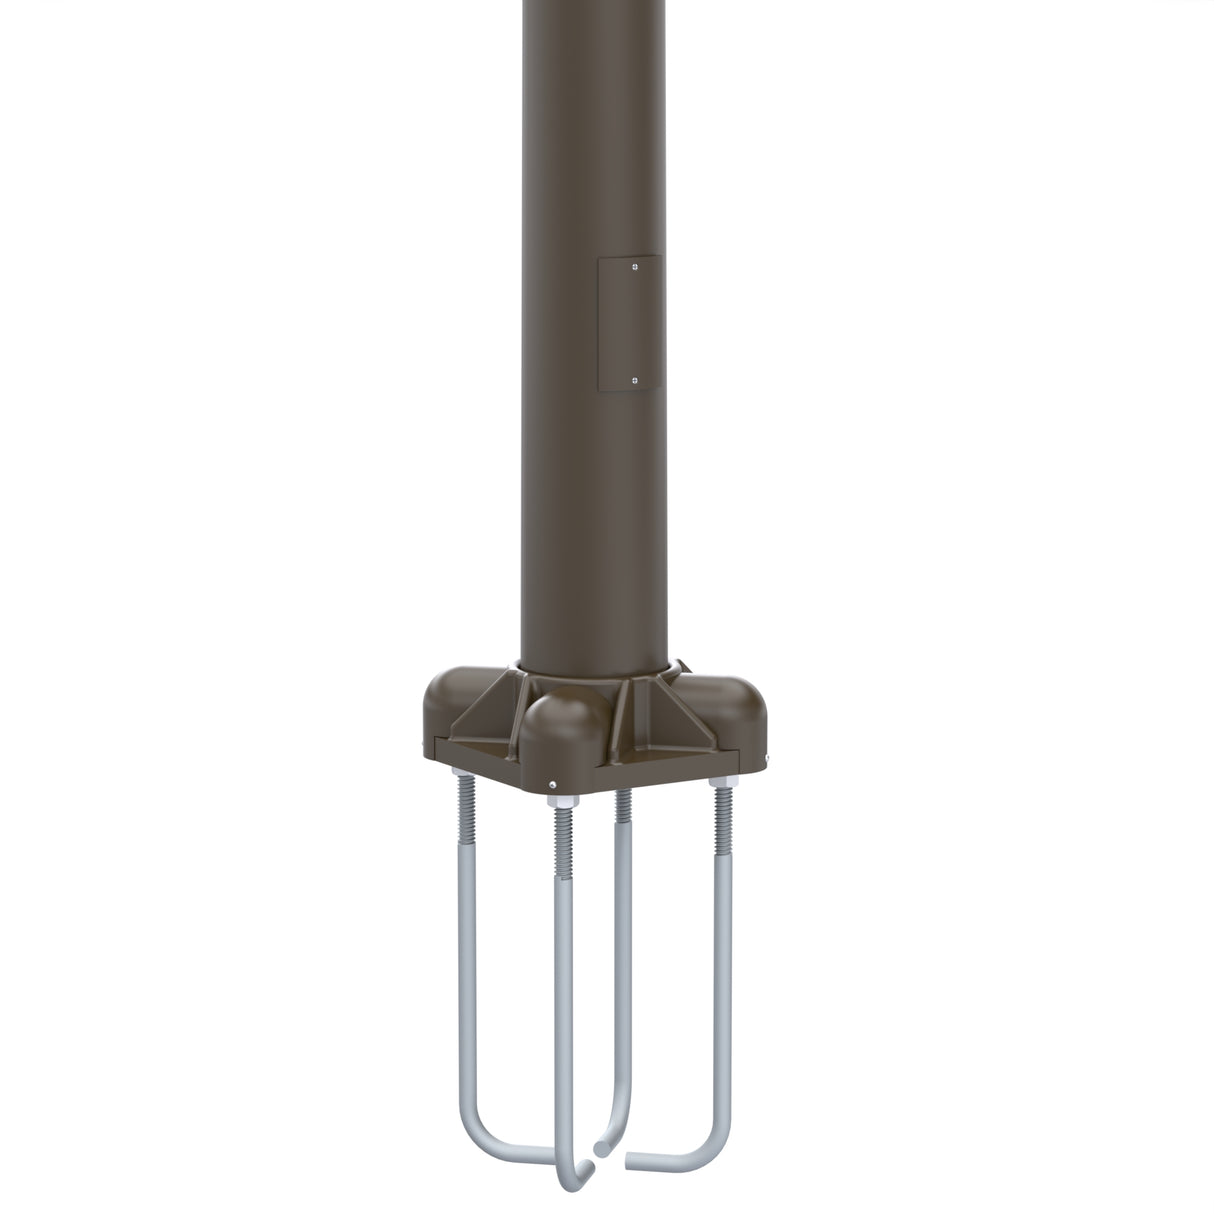 33' Tall x 8.0" Base OD x 4.5" Top OD x 0.188" Thick, Round Tapered Aluminum, Anchor Base Light Pole